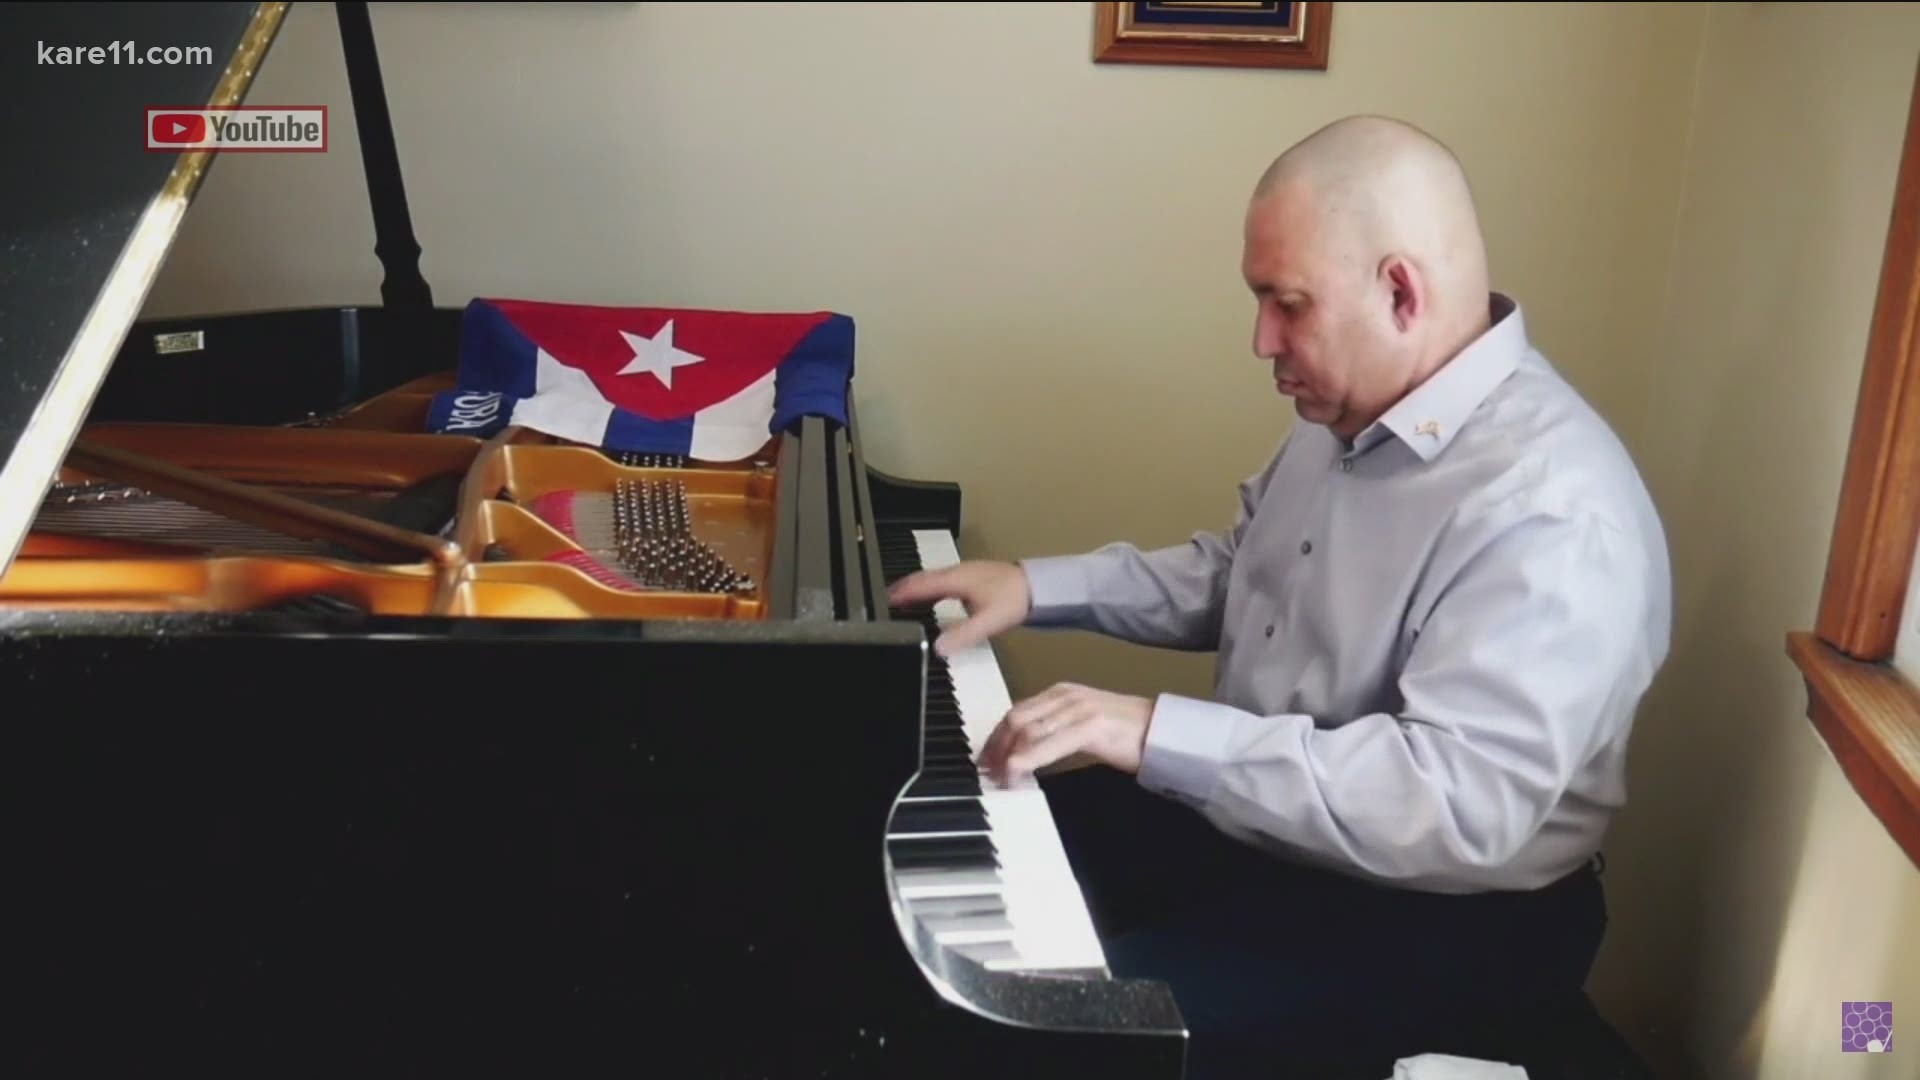 Last April, KARE caught up with Nachito Herrera after a battle with COVID-19 that nearly killed him. Now he's recognized as an official Steinway Artist